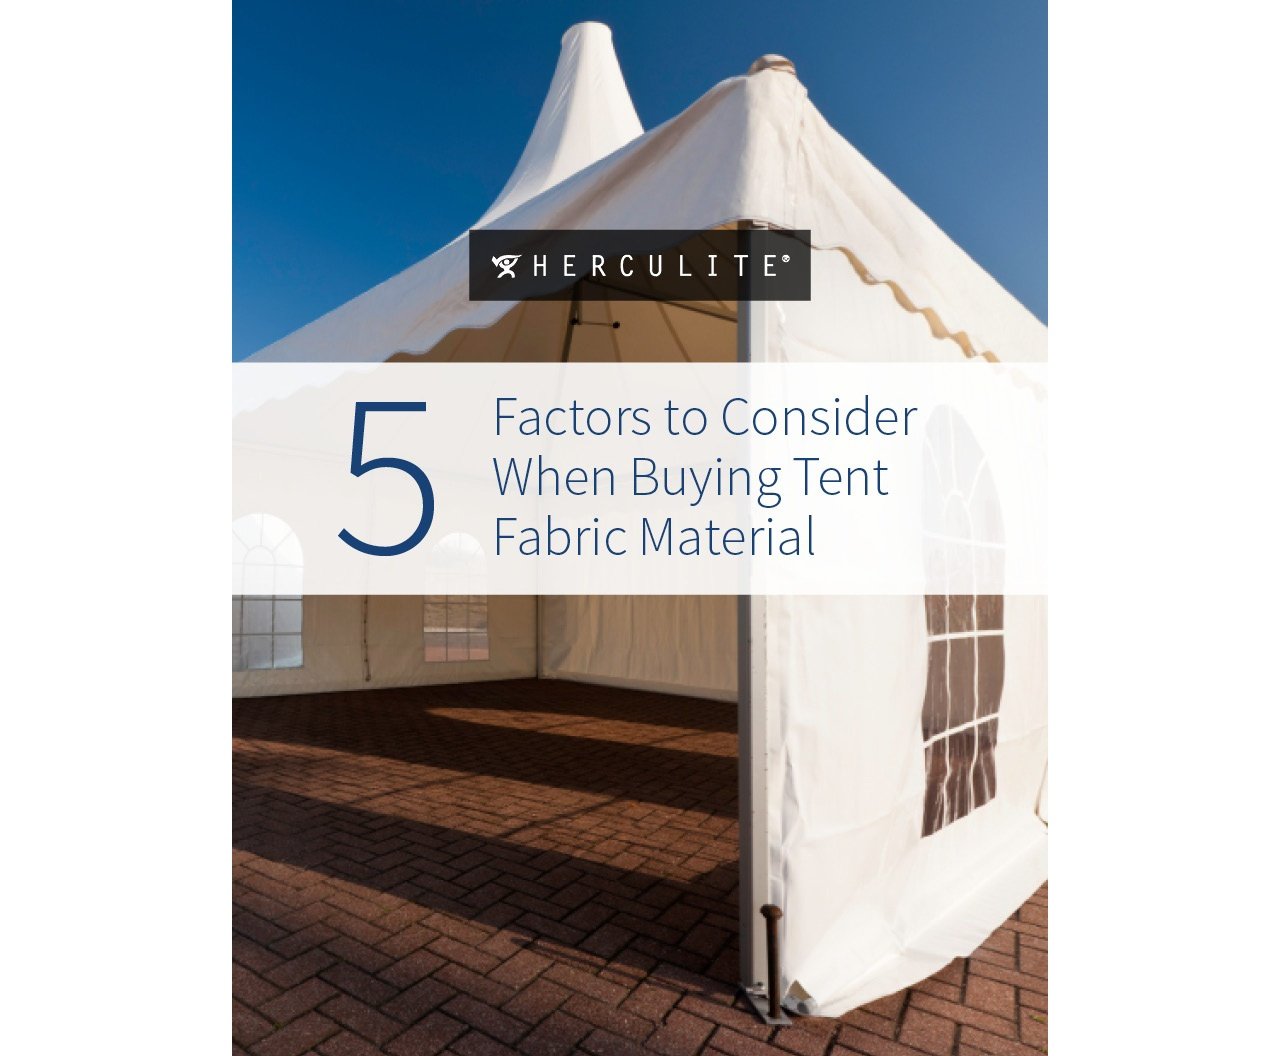 5_Factors_to_Consider_when_Buying_Tent_Fabric_Material_Cover.jpg